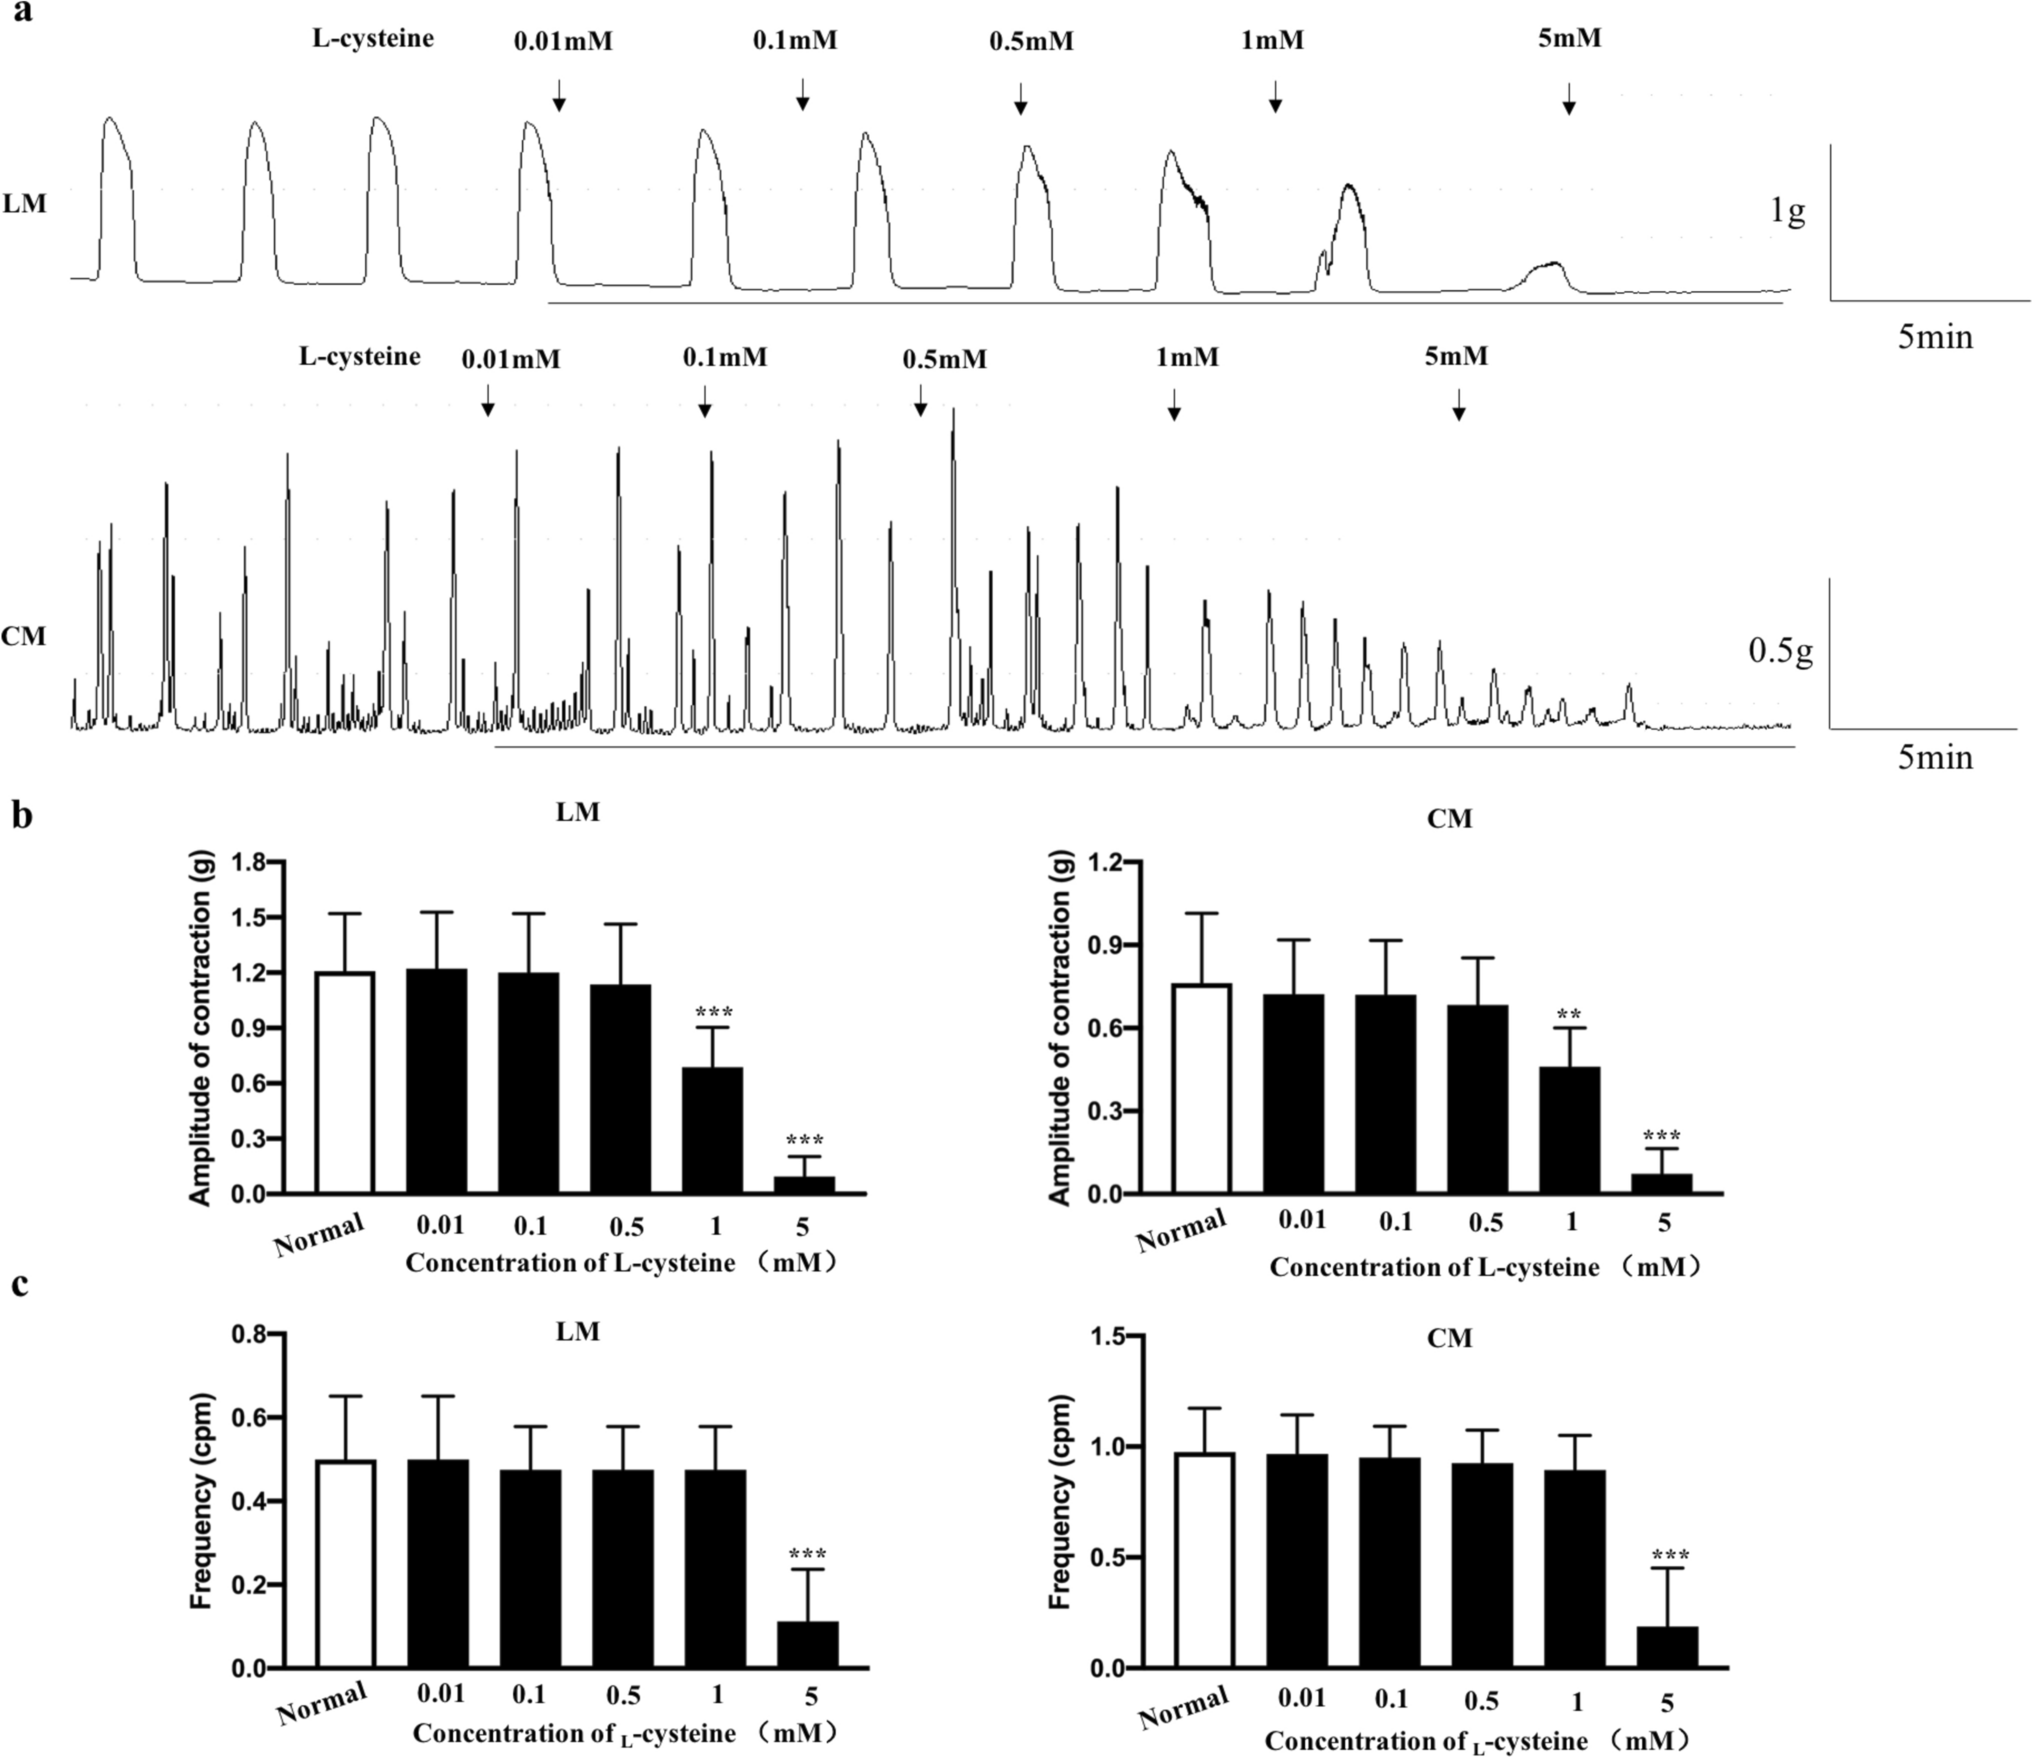 Nitric oxide and ion channels mediate l-cysteine-induced inhibition of colonic smooth muscle contraction